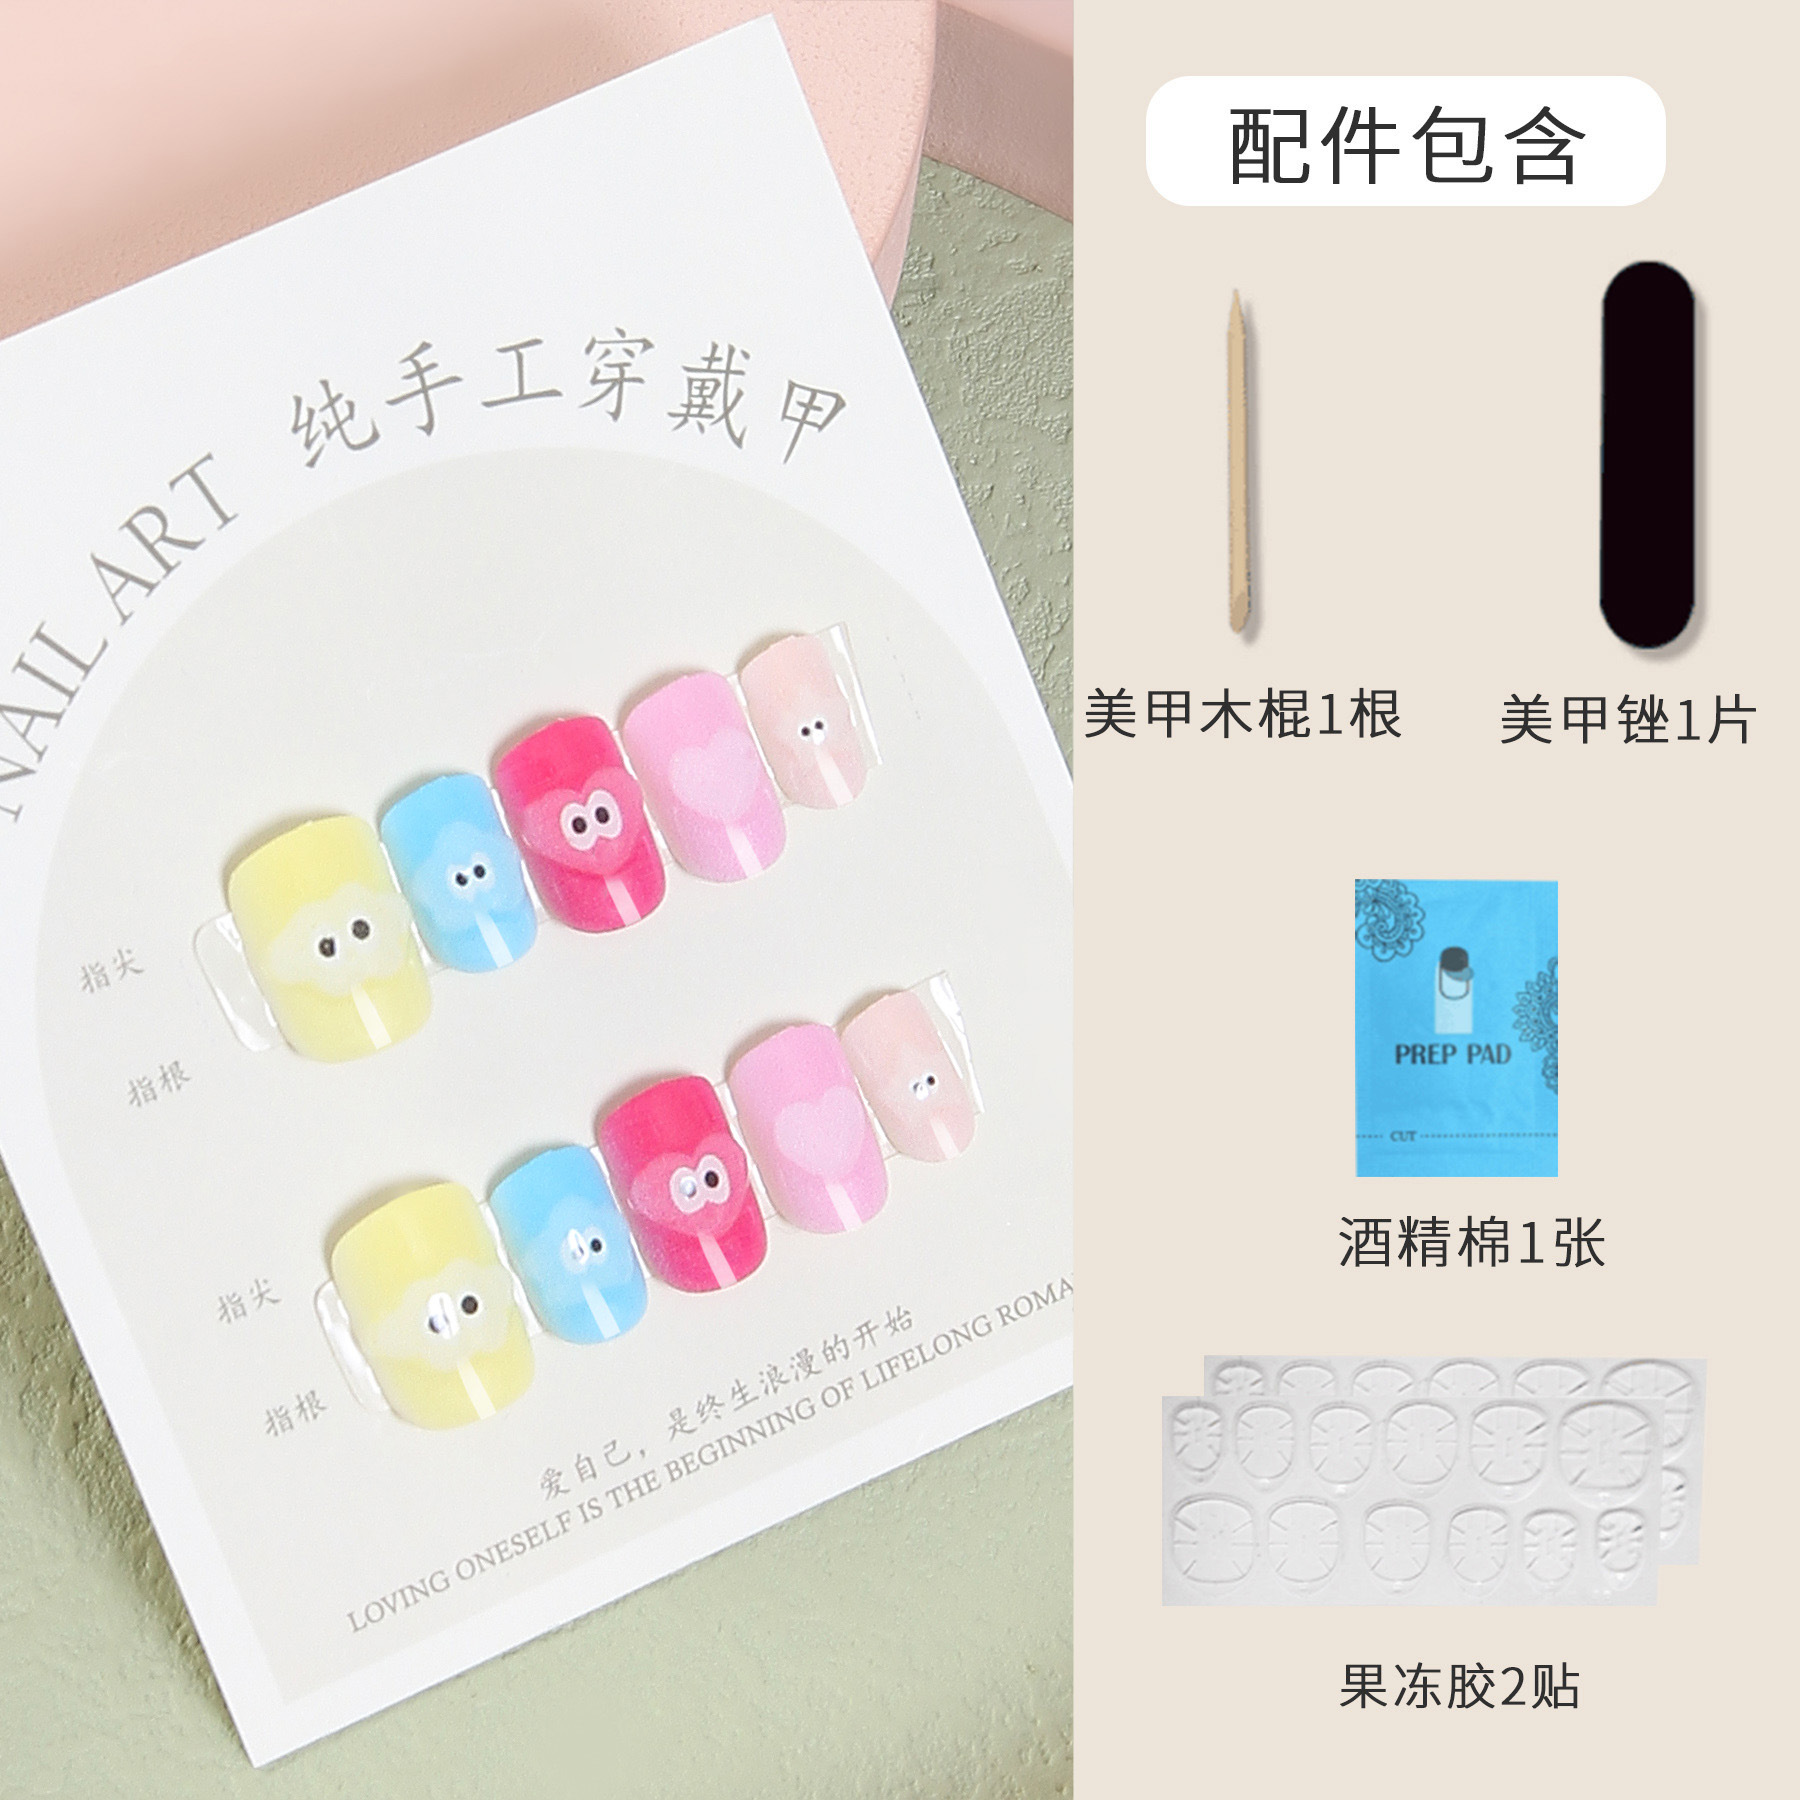 Best-Seller on Douyin Hand-Worn Armor Cute Japanese Style Small and Short Armor Cartoon Girlish Nail Beauty Crystal Relief Fake Nails